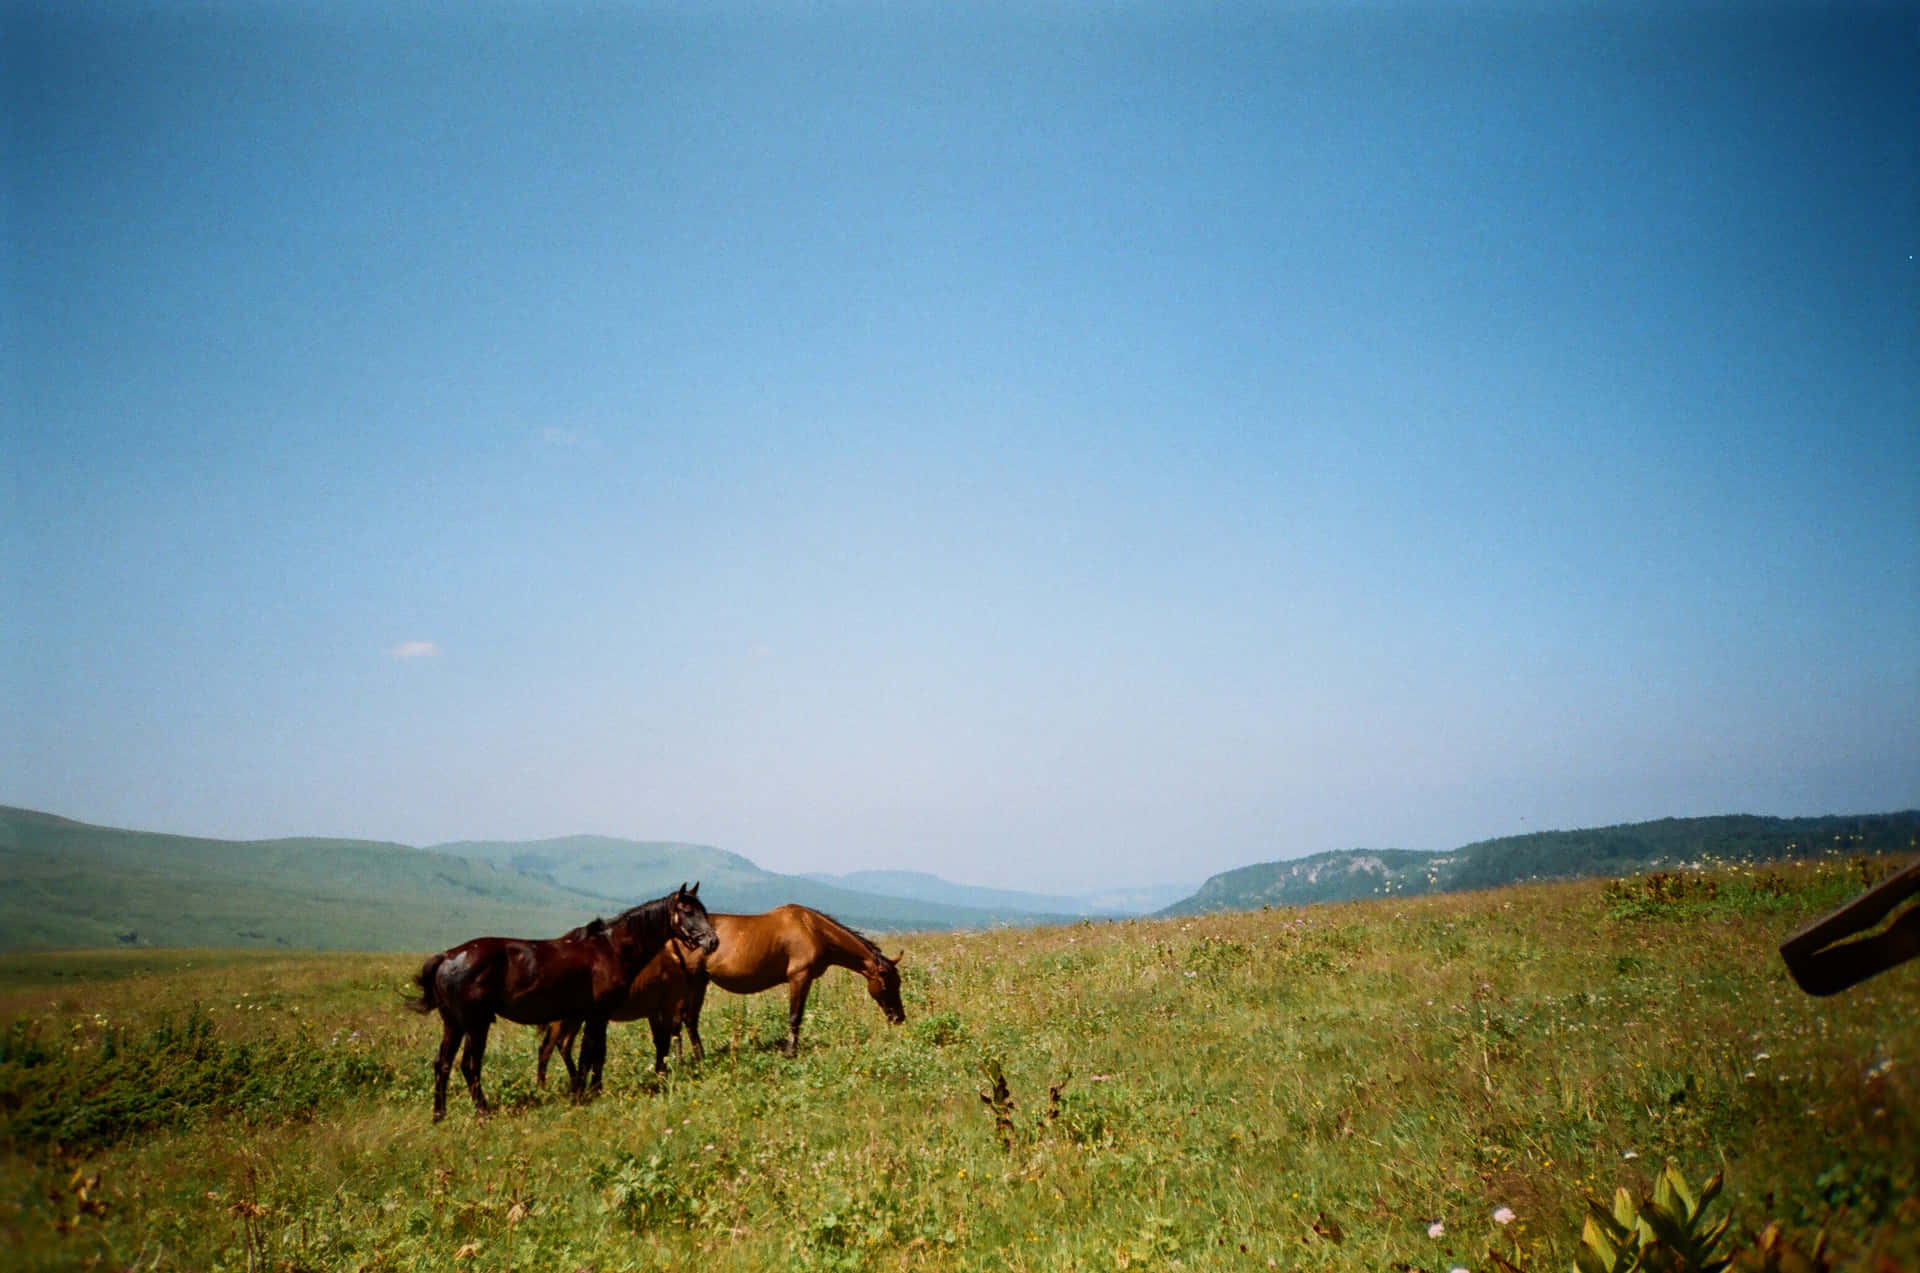 Two horses standing alone in a lush green field